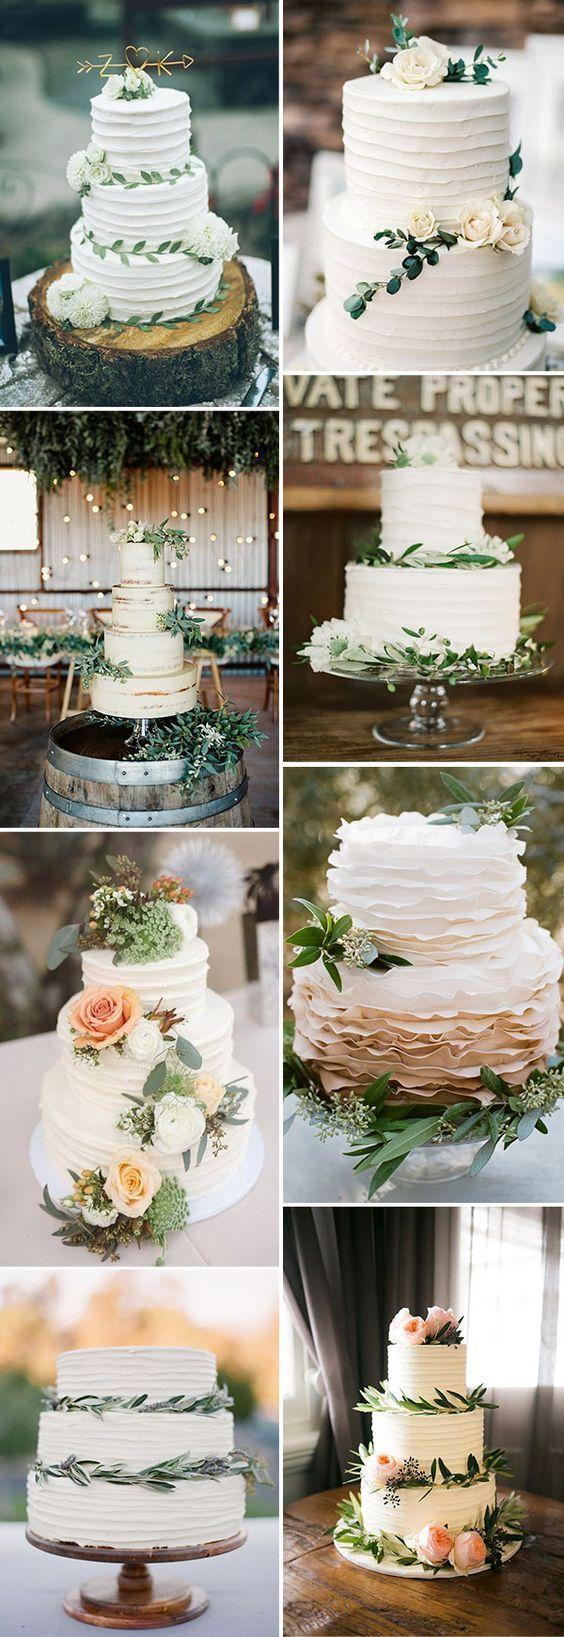 Wedding - 50 Steal-Worthy Wedding Cake Ideas For Your Special Day